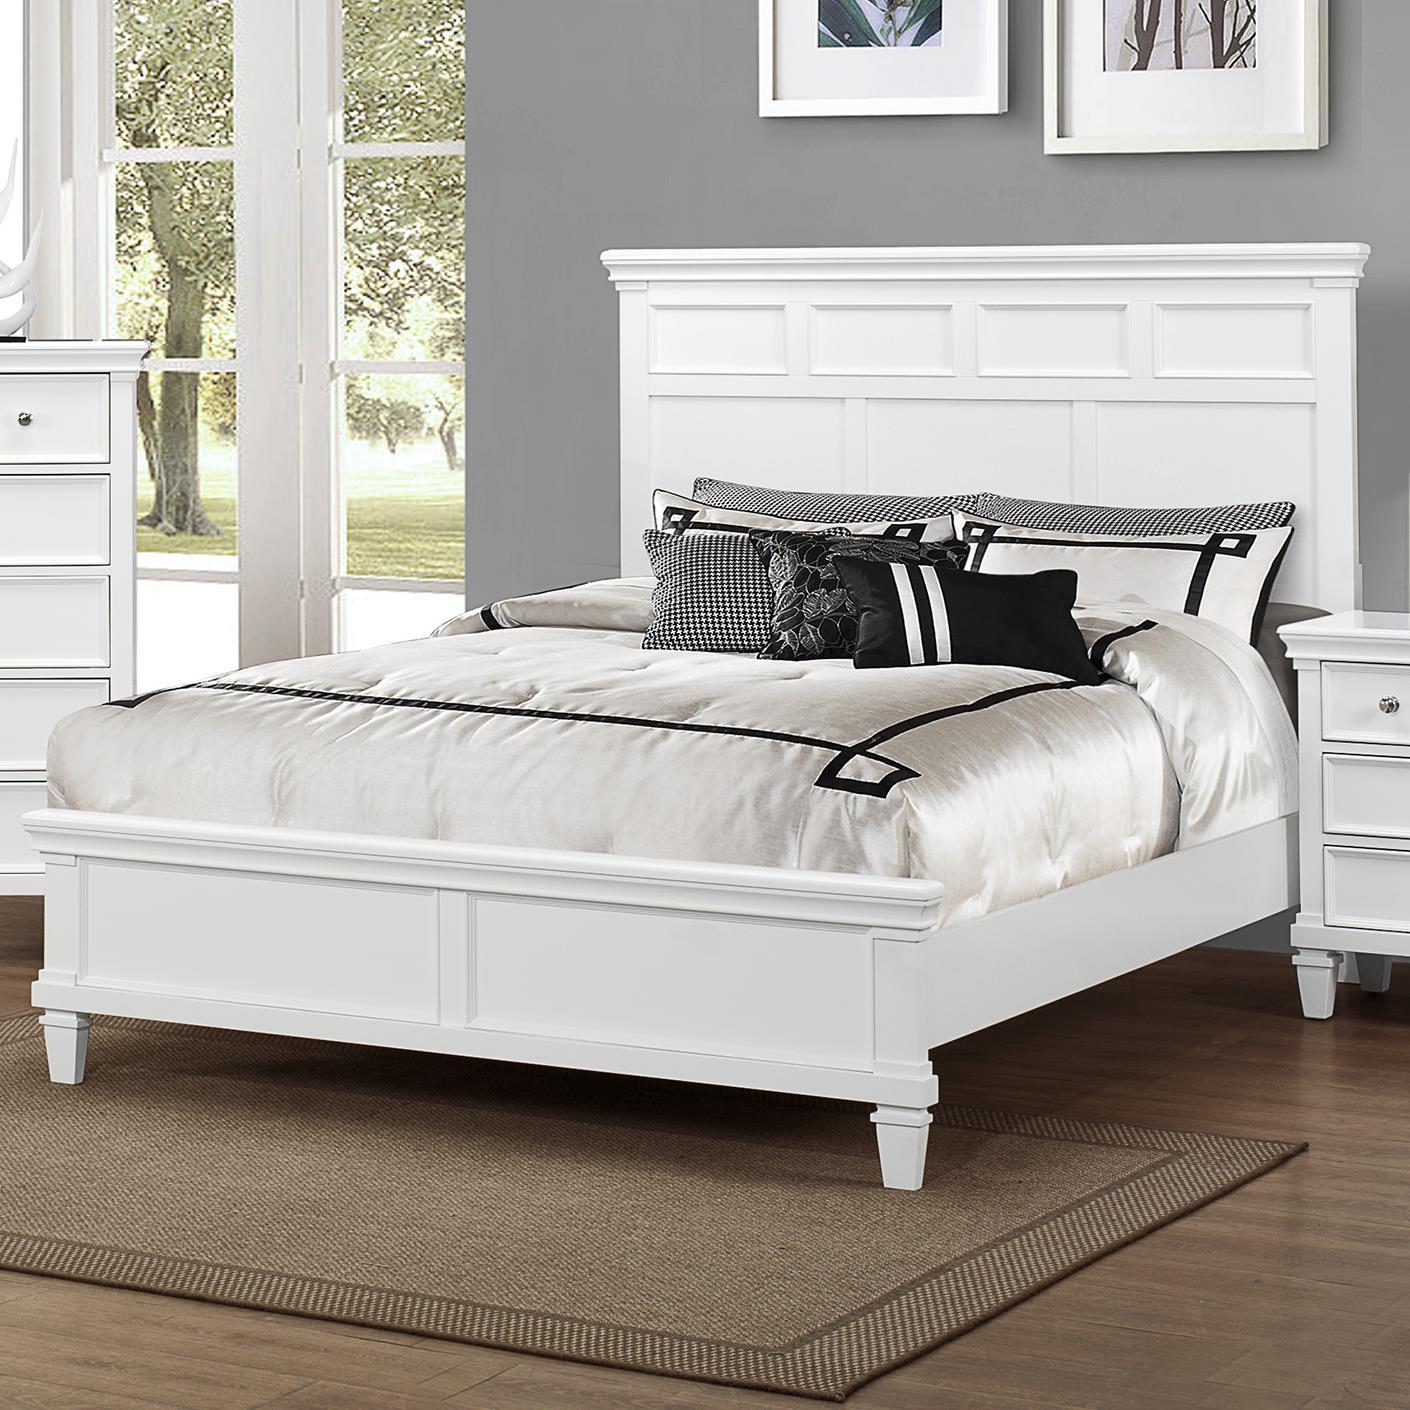 

    
Crown Mark RB9100 Hannah Classic White Finish Solid Wood Queen Size Bedroom Set 5Pcs
